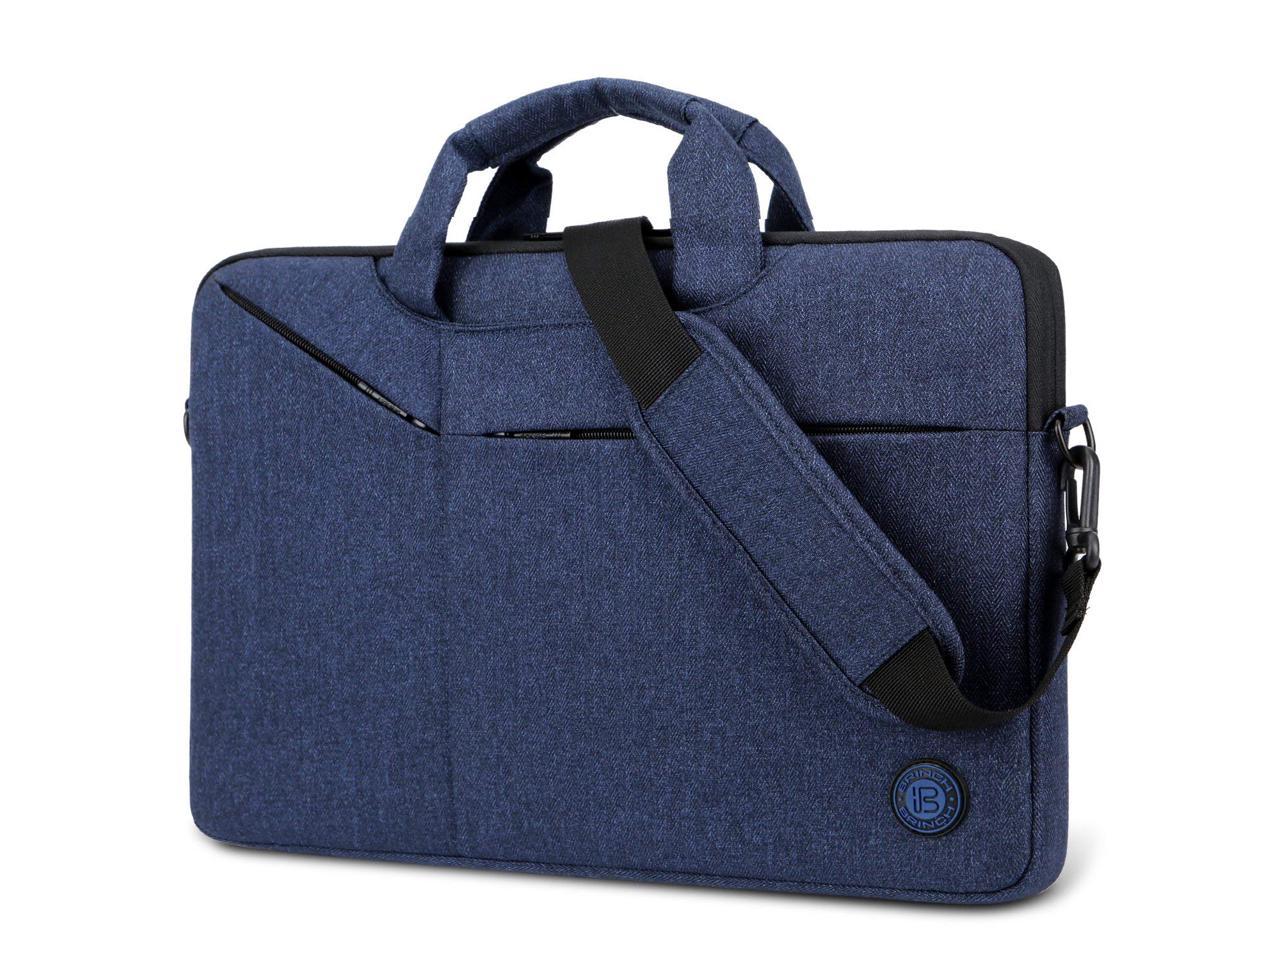 Laptop Case Computer Bag Sleeve Cover Aircraft Disaster Waterproof Shoulder Briefcase 13 14 15.6 Inch